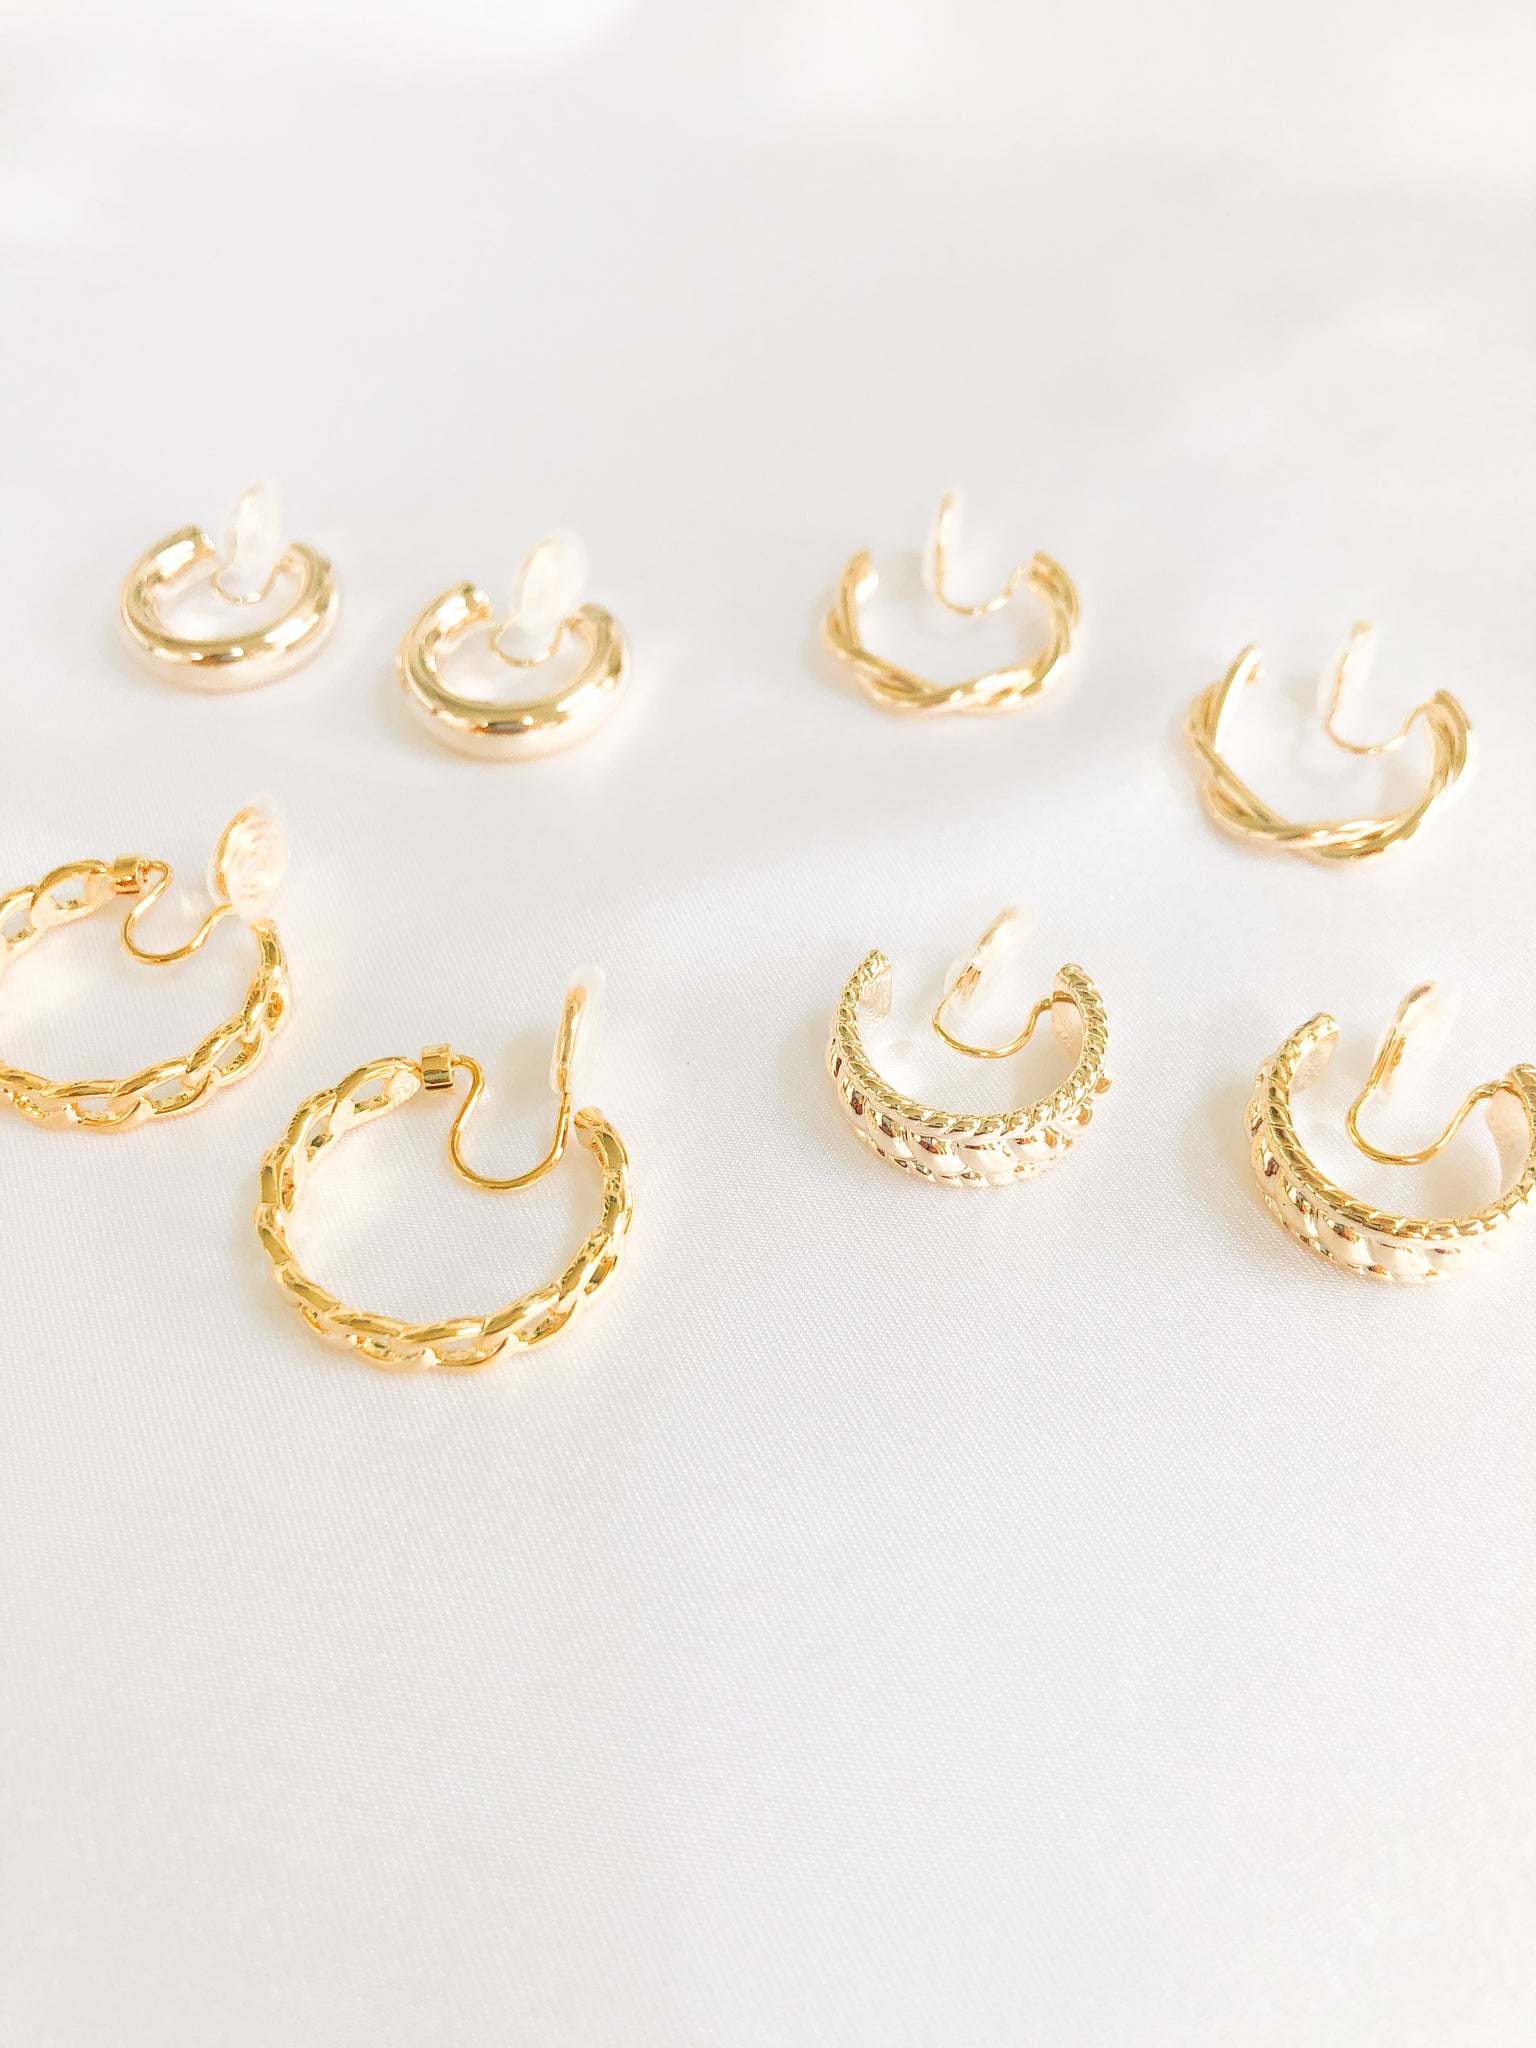 Add some glam to your wardrobe with our bundle of different gold clip-on hoop earrings. This set features four pairs of earrings, each with a unique design. Amy Clip-on Hoops, Twisted Clip-on Hoops, Ella Clip-on Hoops, and Jessika Clip-on Hoops